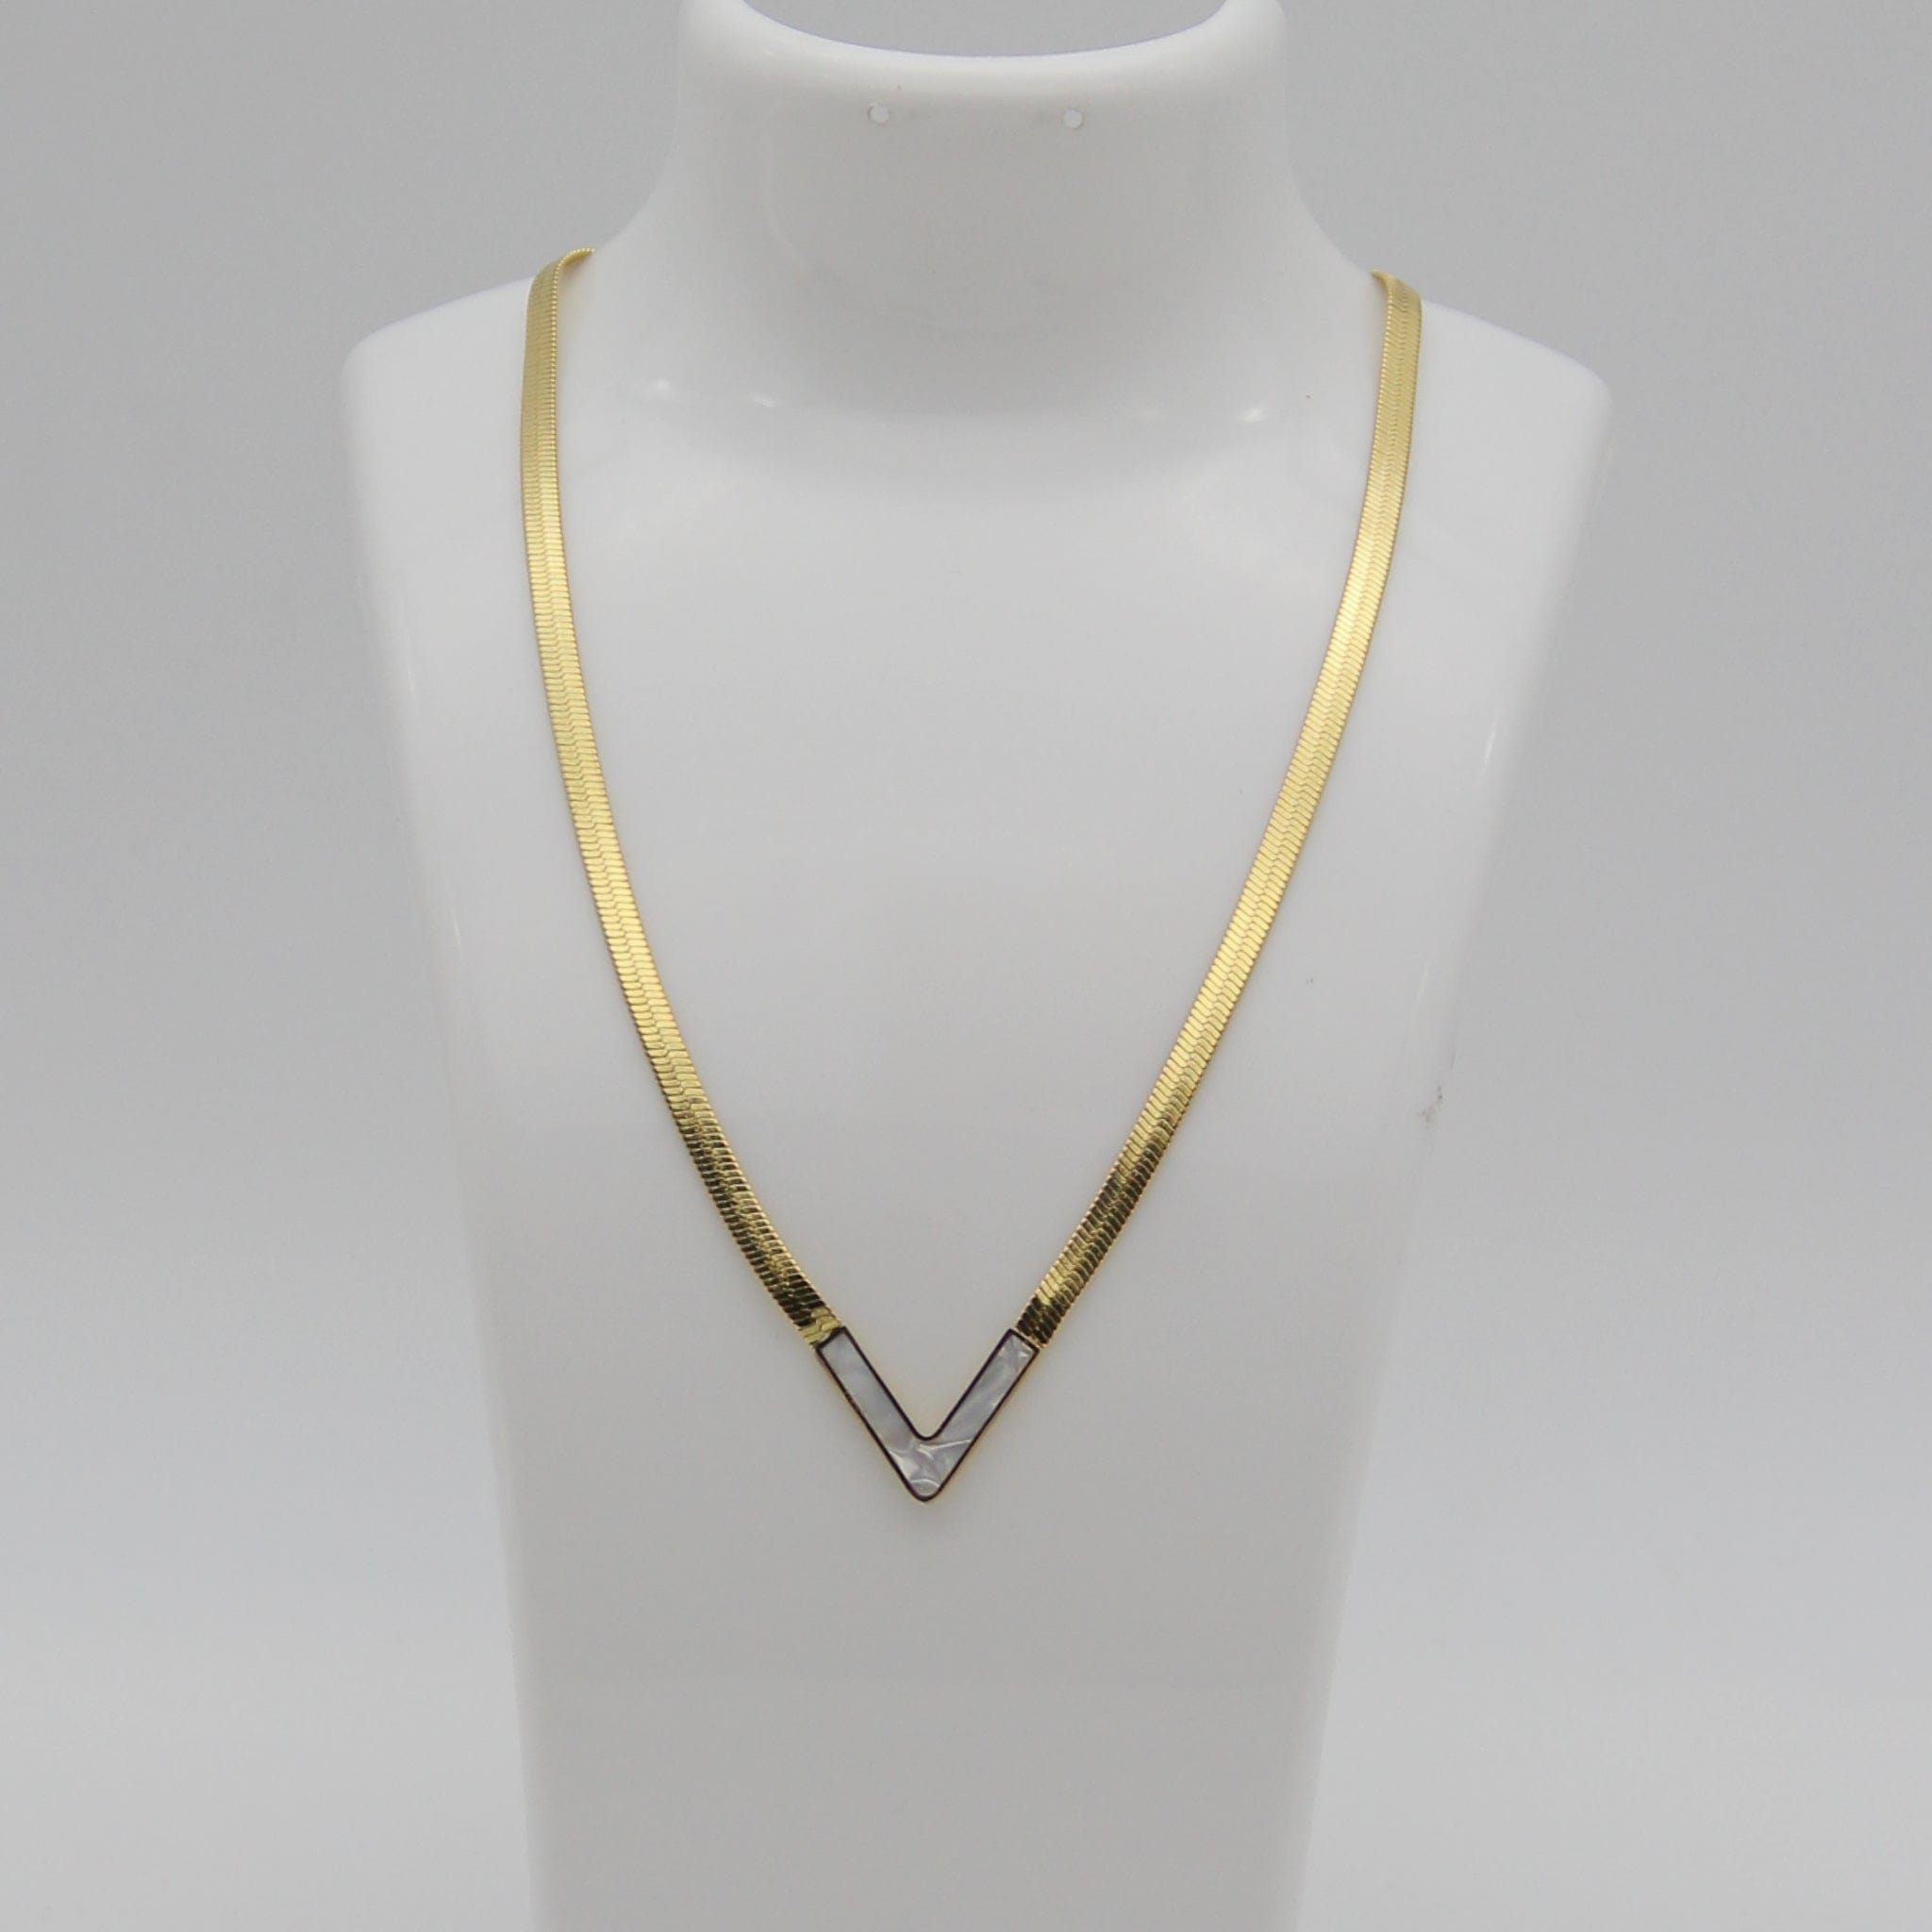 Outlet W&B Female Necklaces Pharaonic Golden Stainless Steel Necklace